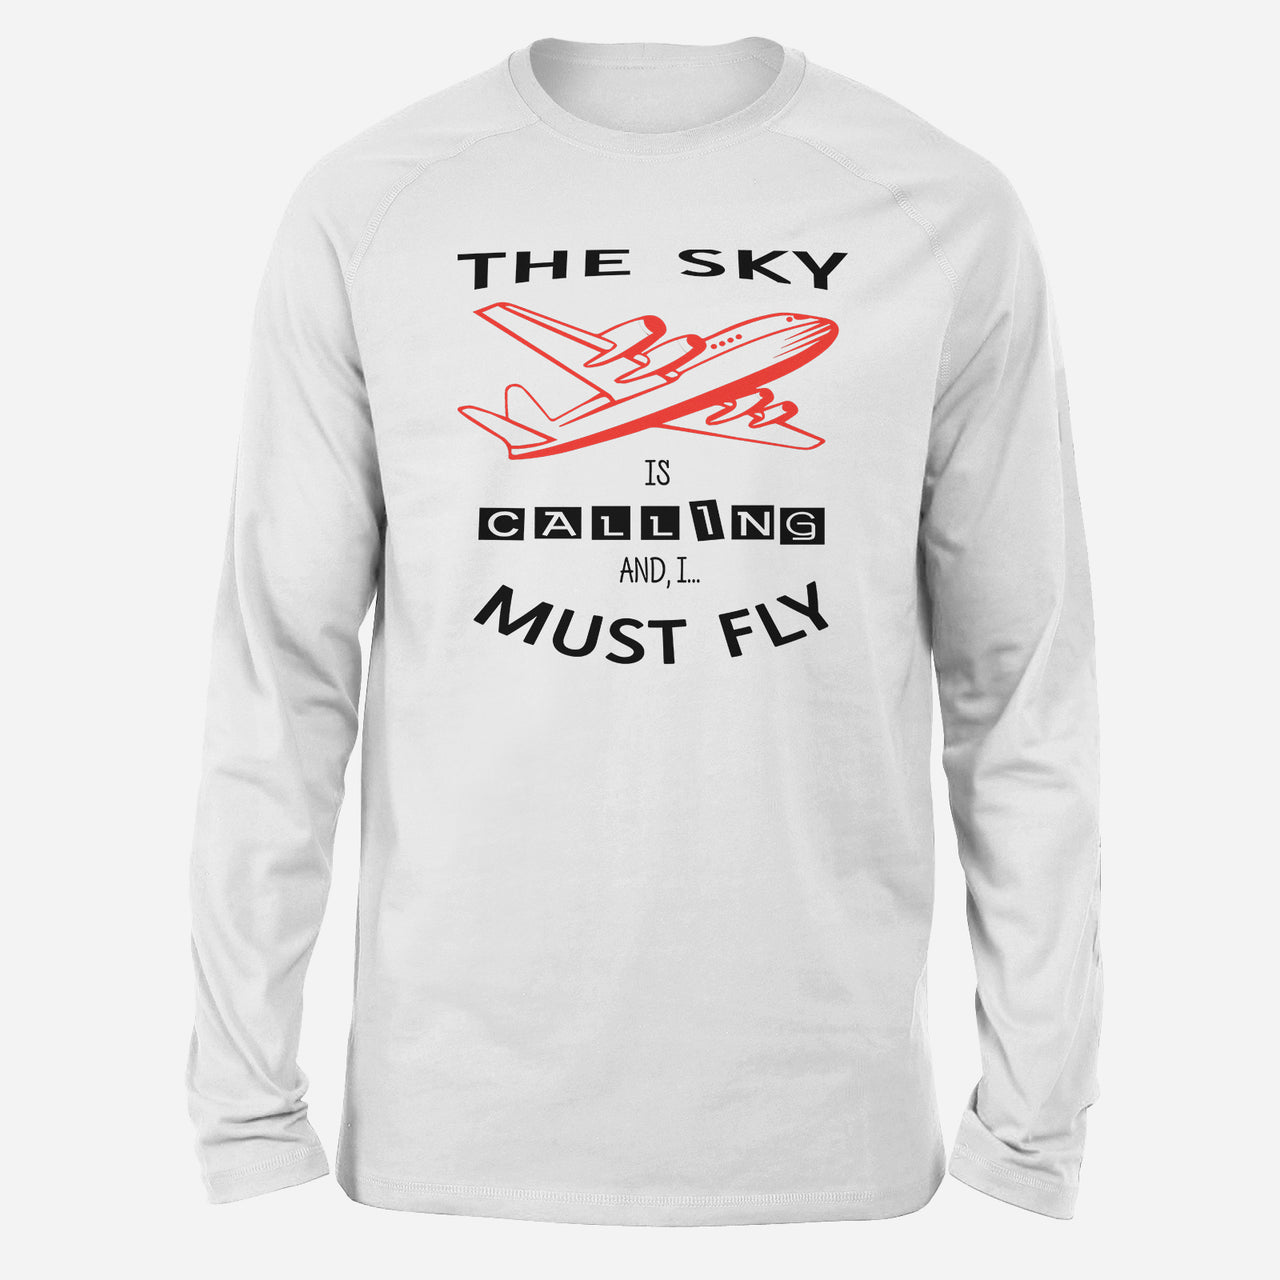 The Sky is Calling and I Must Fly Designed Long-Sleeve T-Shirts